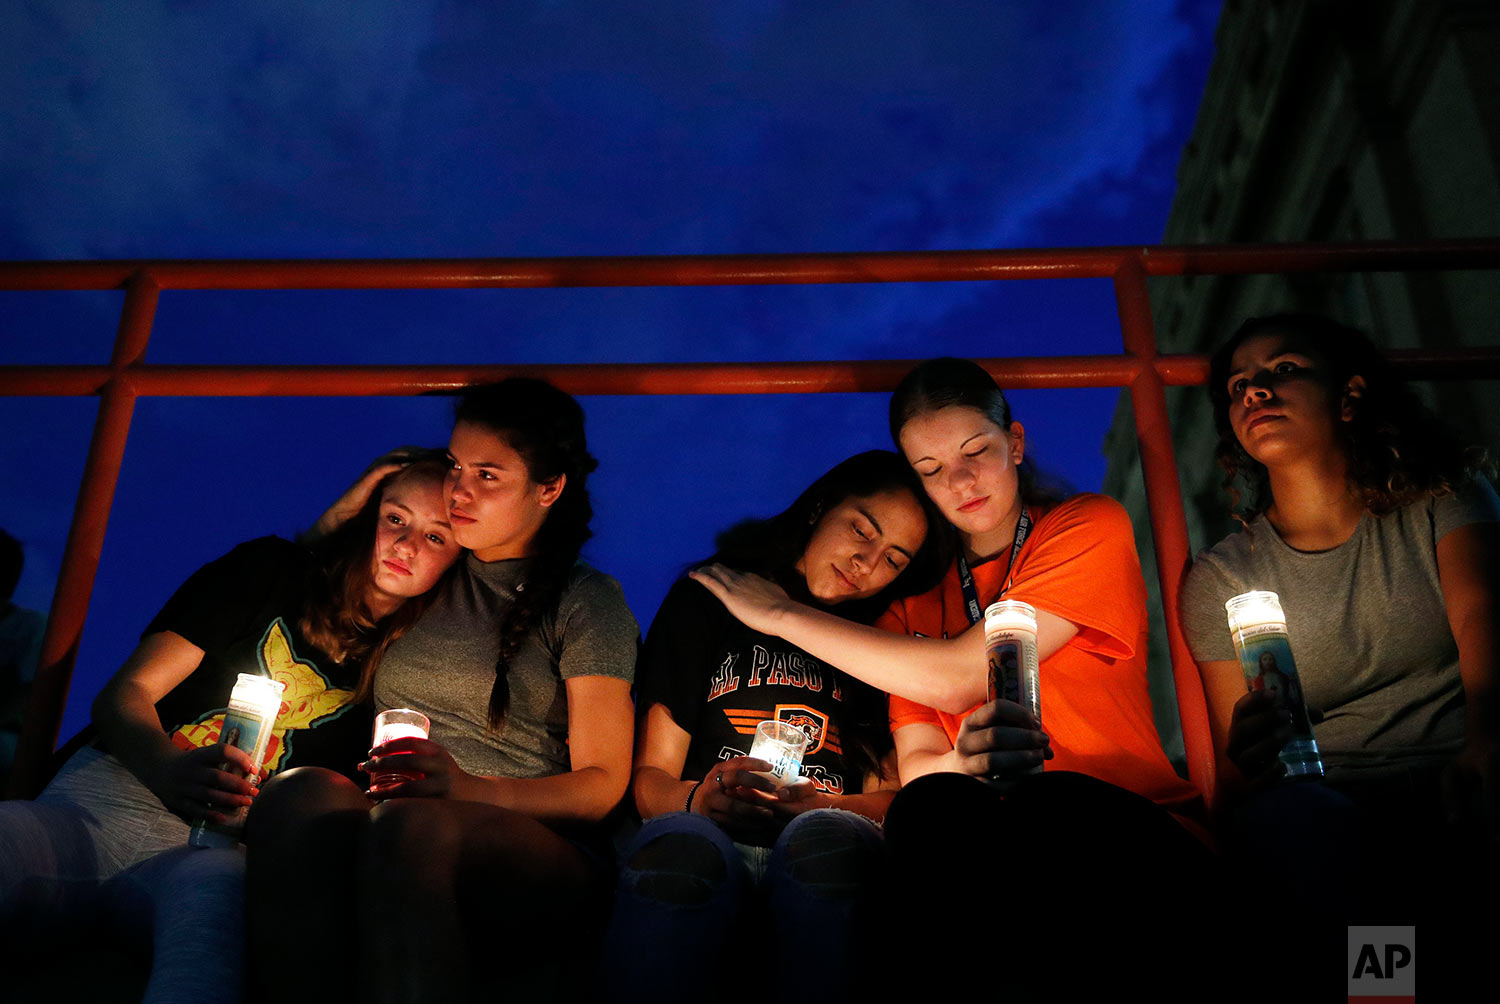  From left, Melody Stout, Hannah Payan, Aaliyah Alba, Sherie Gramlich and Laura Barrios comfort each other during a vigil for victims of the shooting Saturday, Aug. 3, 2019, in El Paso, Texas. A young gunman opened fire in an El Paso, Texas, shopping